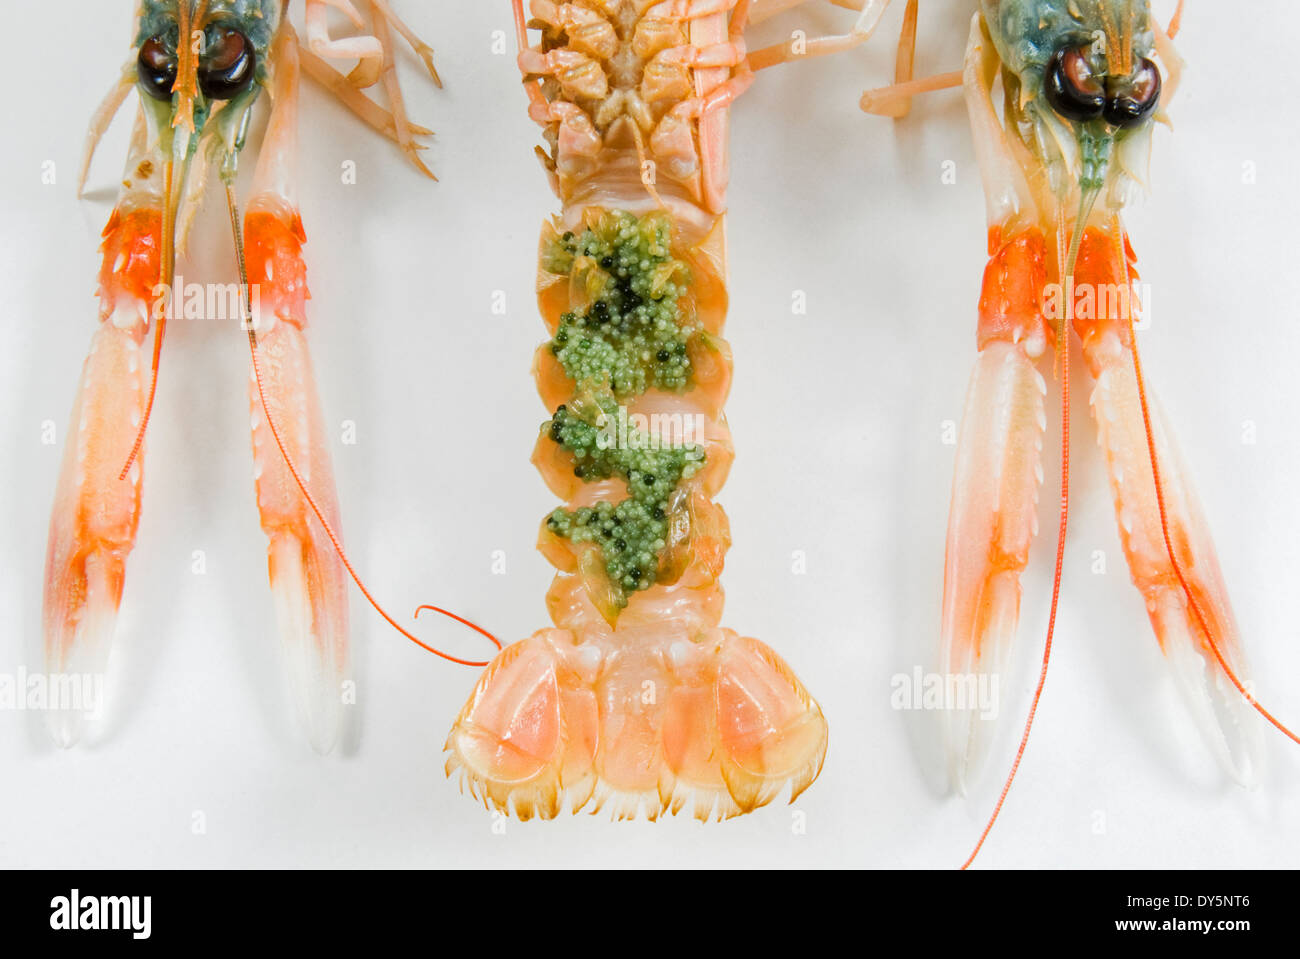 Norway lobster or Dublin Bay prawn,or langoustine or scampi, (Nephrops norvegicus) with eggs attached to the abdomen Stock Photo